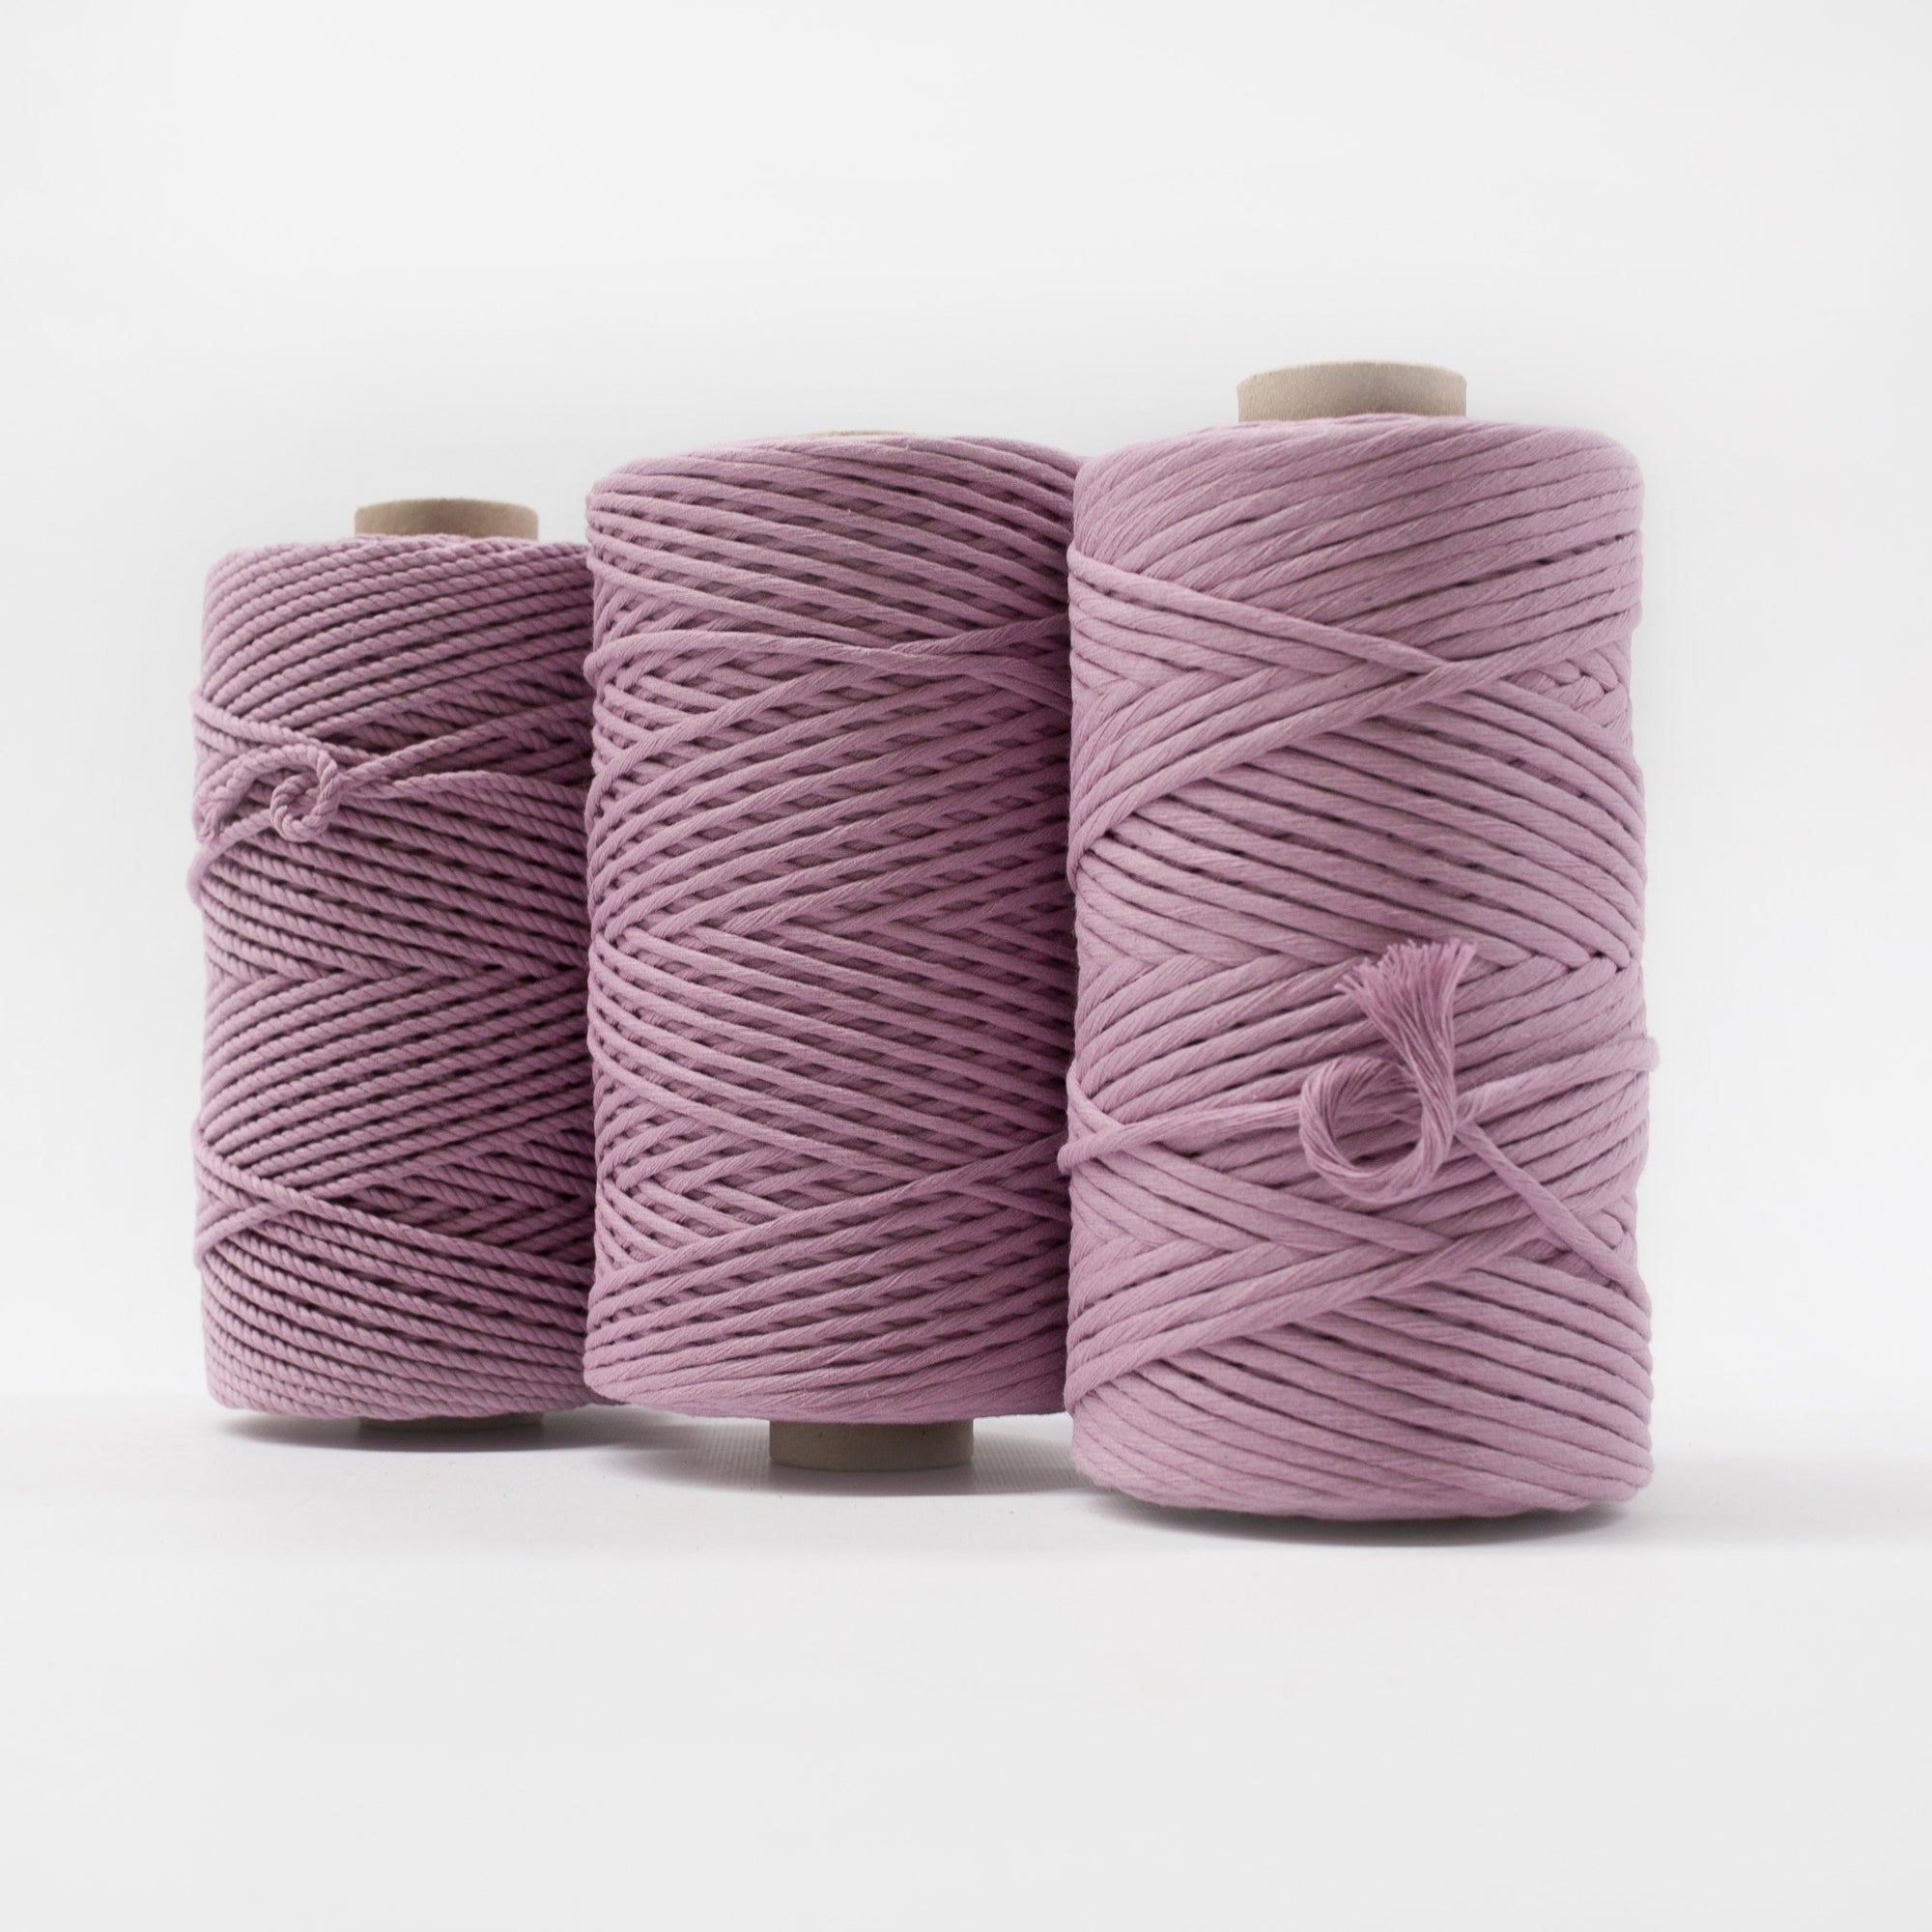 Mary Maker Studio Luxe Colour Cotton 4mm 1KG Recycled Luxe Macrame Rope // Mauve Mist macrame cotton macrame rope macrame workshop macrame patterns macrame